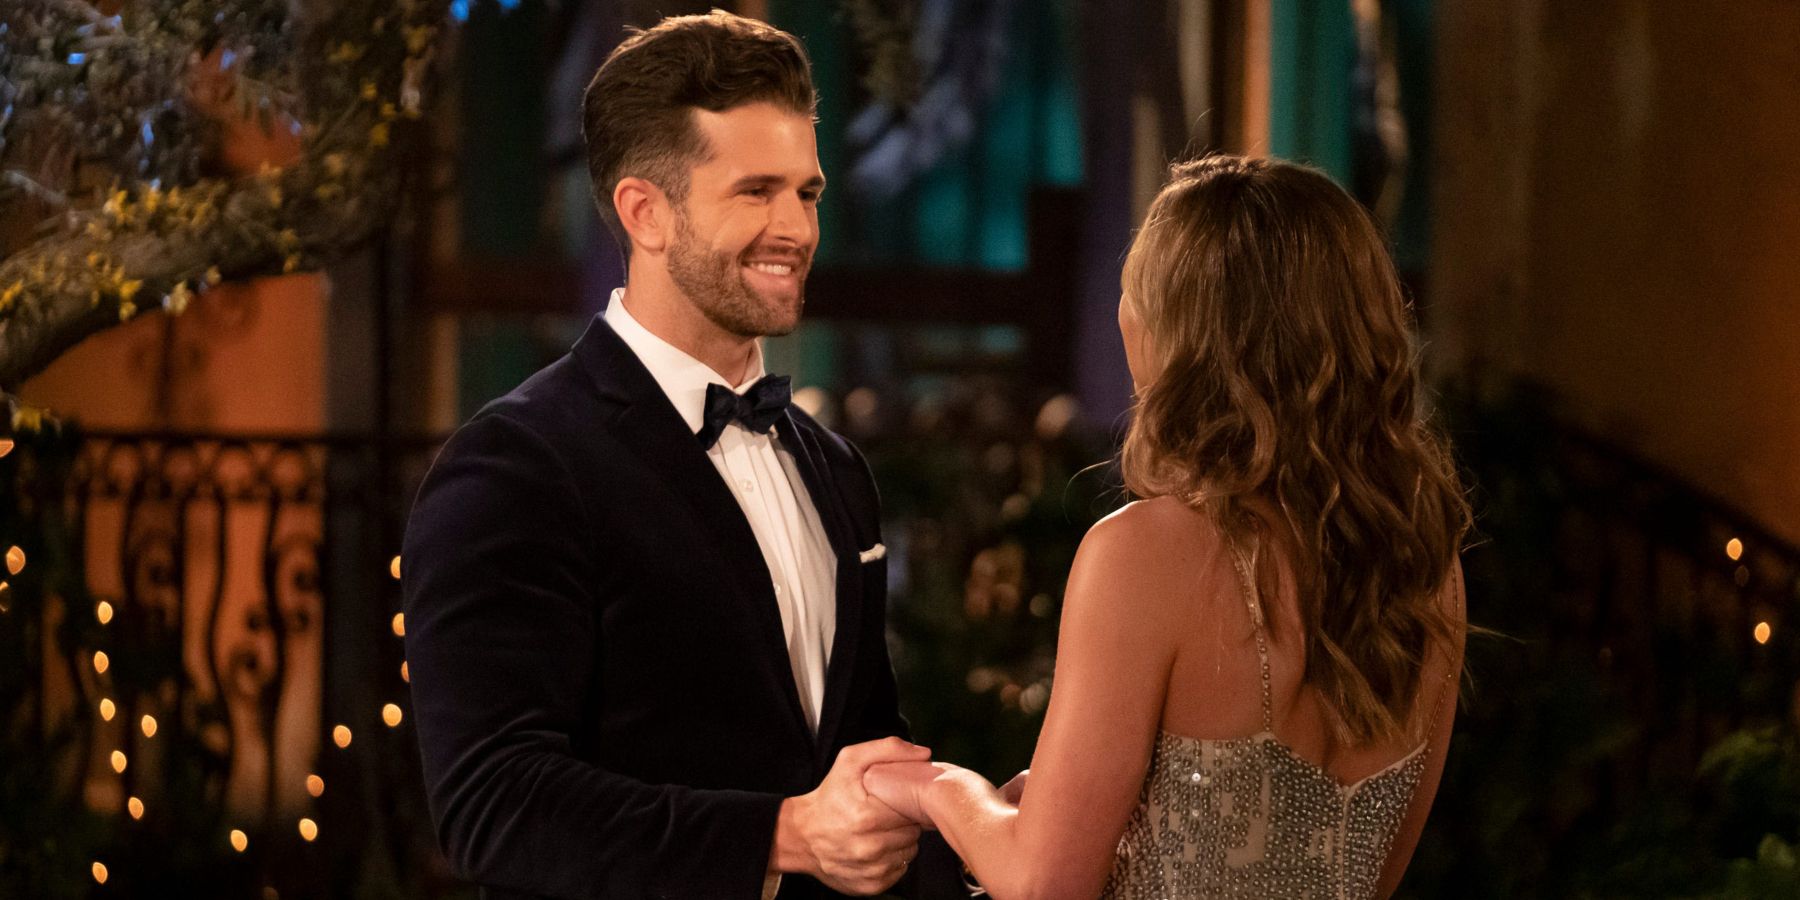 Jed Wyatt and Hannah Brown on The Bachelorette